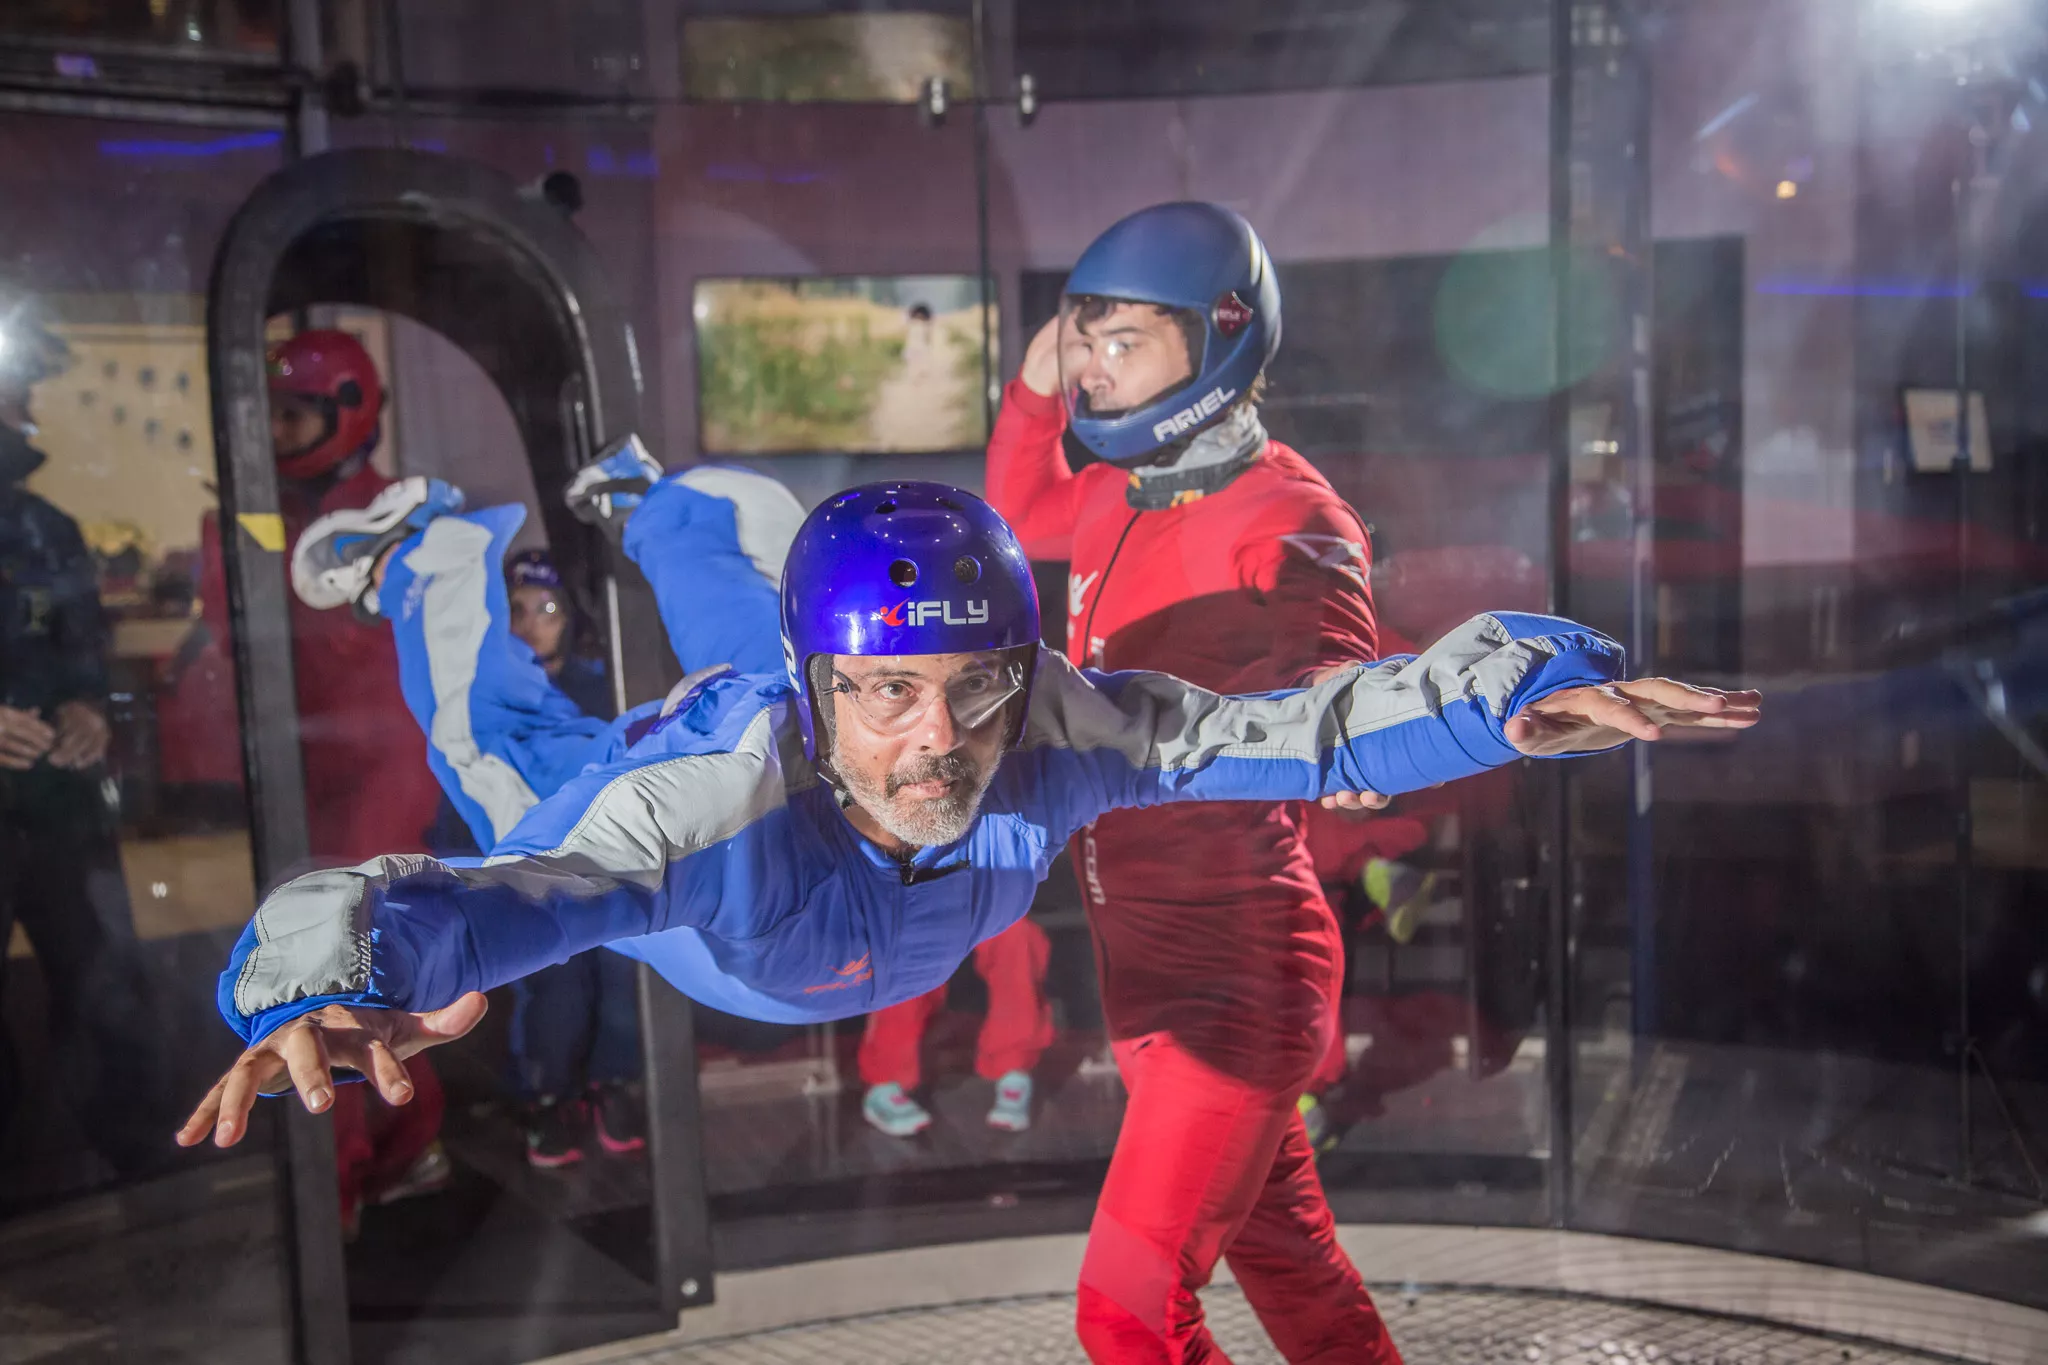 Older man flying in an indoor skydiving tunnel with an iFLY instructor alongside him